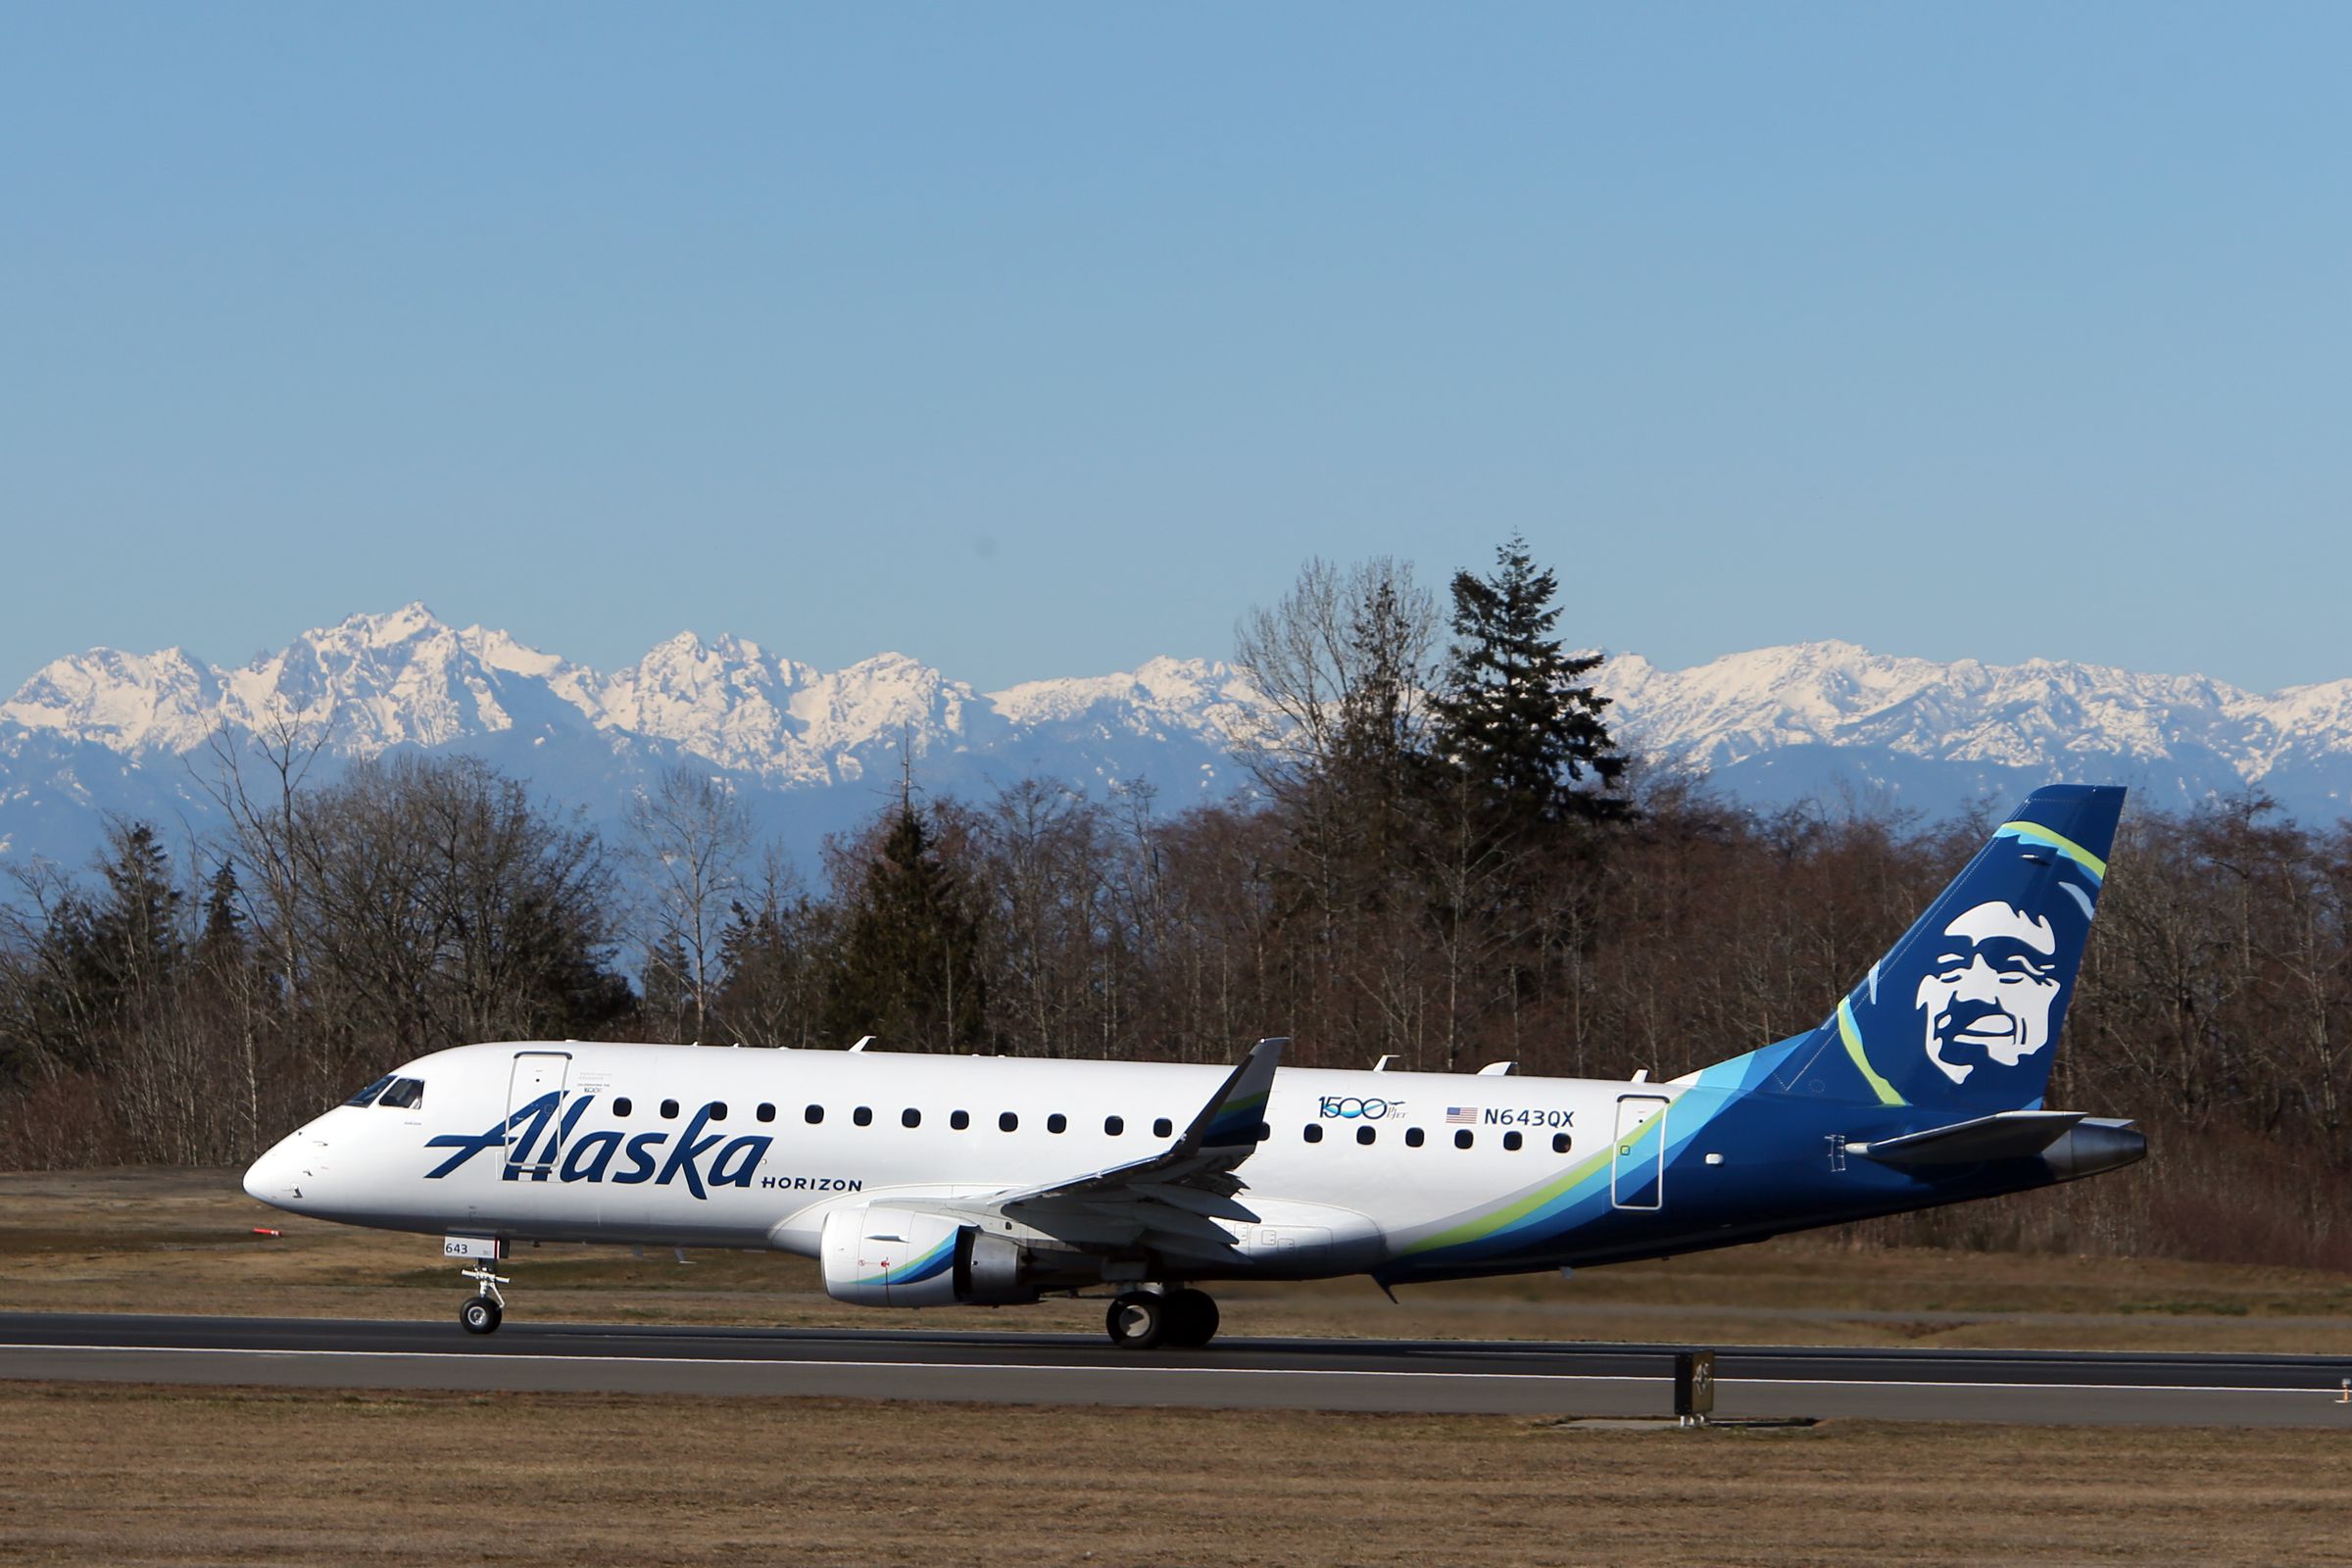 The first commercial flight out of the new Everett Paine Field Airport terminal takes off Monday, March 4, 2019. The inaugural flight left at 10 am, carrying state and local dignitaries to Portland, and two subsequent flights departed to Las Vegas and Pho